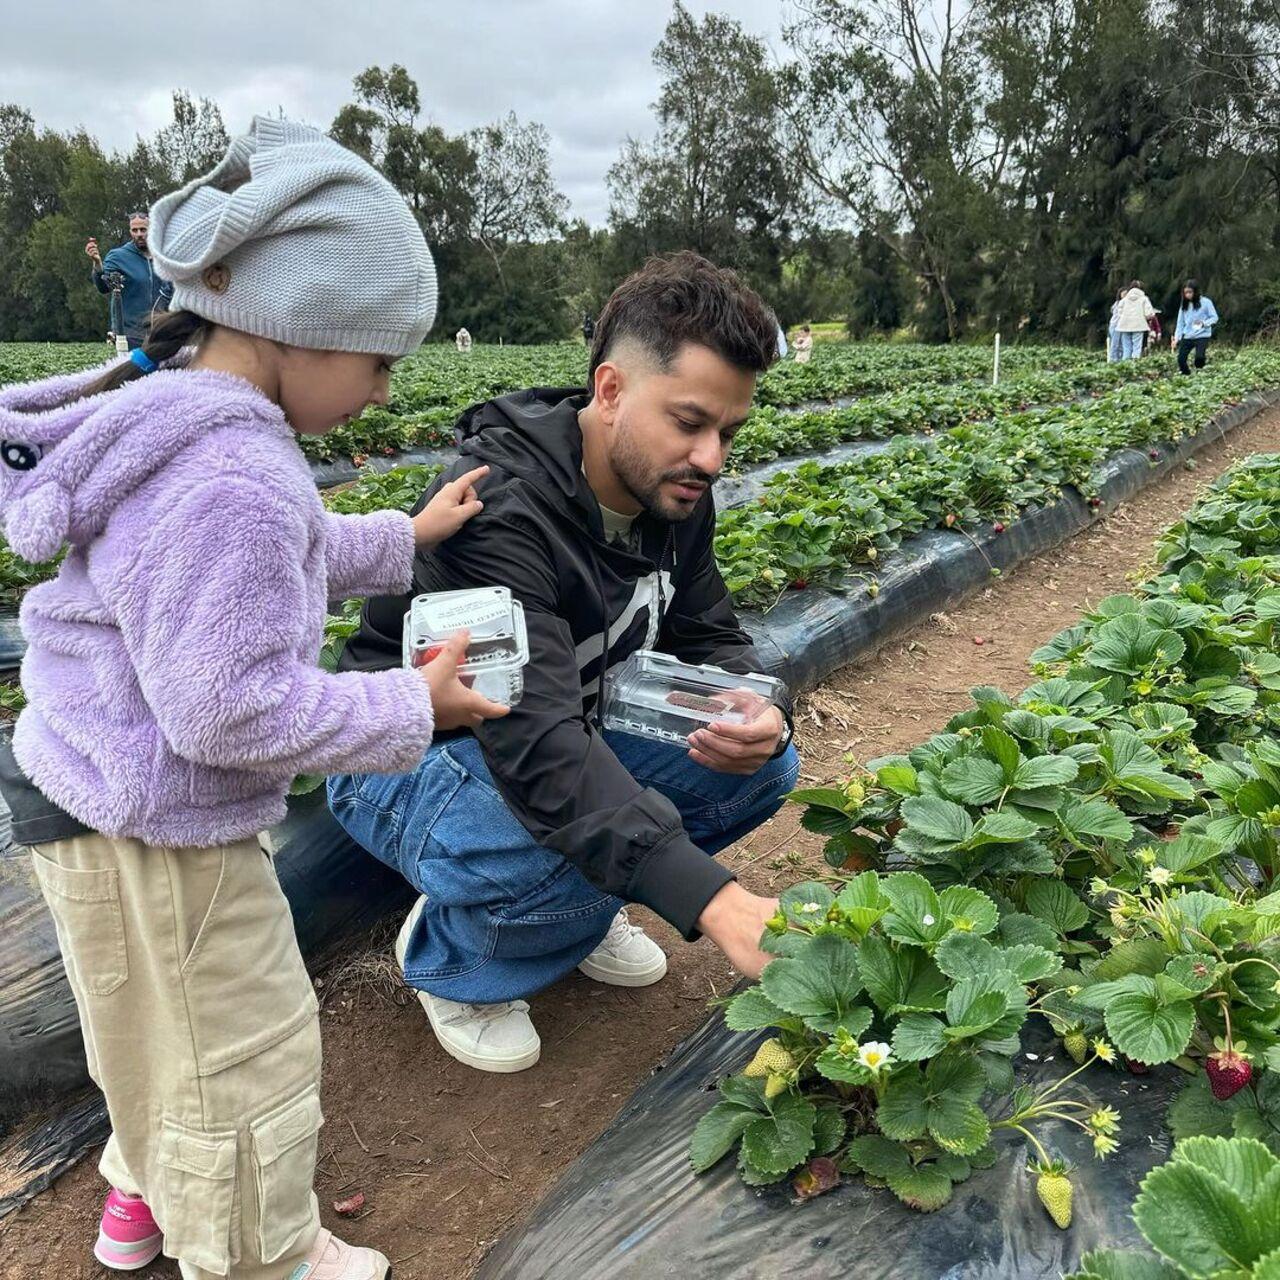 Kunal teaches his little one tricks and tips on carefully plucking the best strawberries and Inaaya seems keen on learning